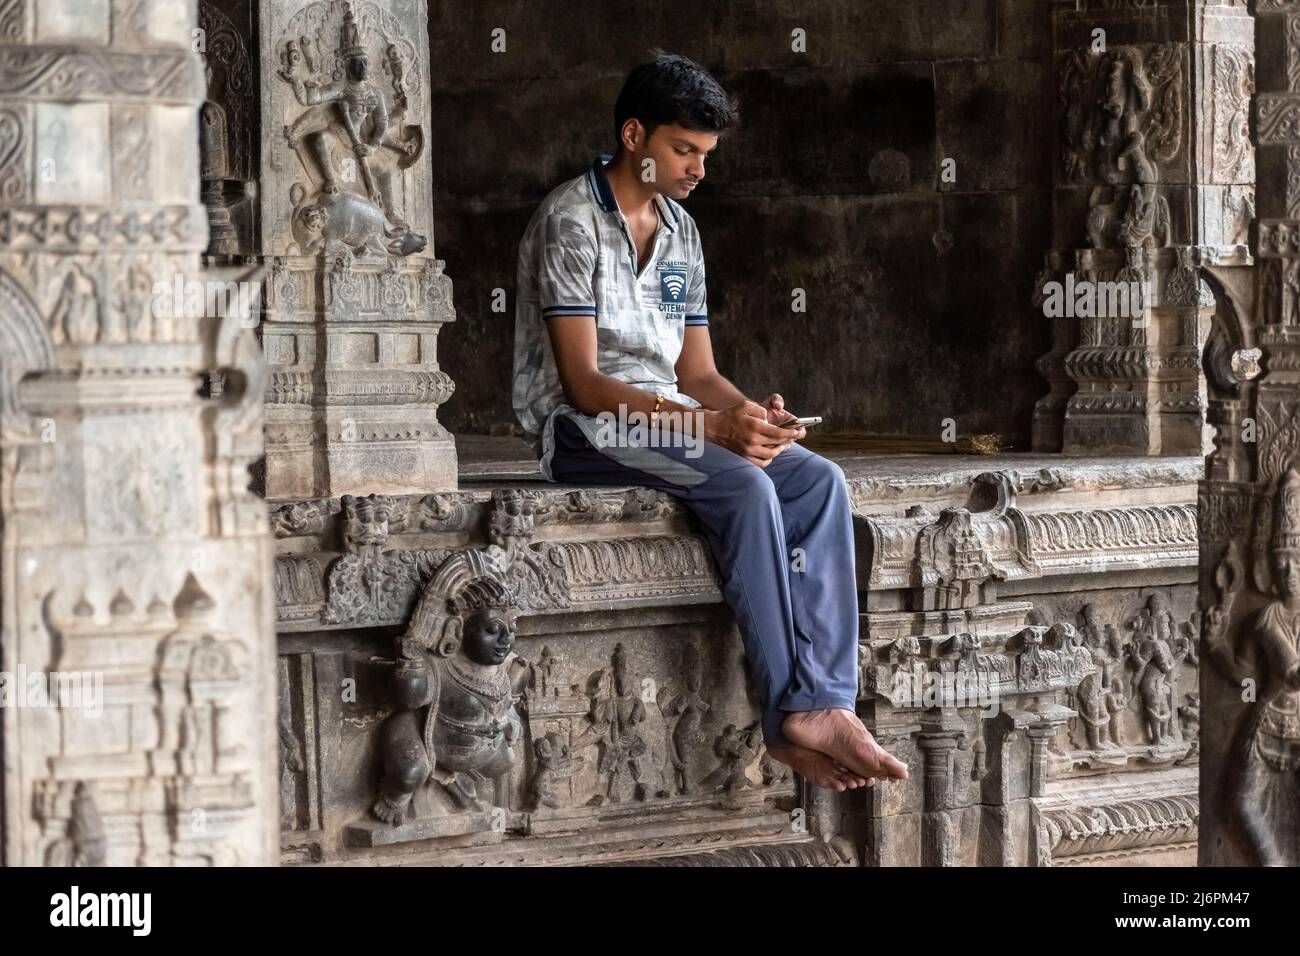 Vellore, Tamil Nadu, India - September 2018: An Indian boy sitting alone in an ancient Hindu temple at the Vellore Fort. Stock Photo